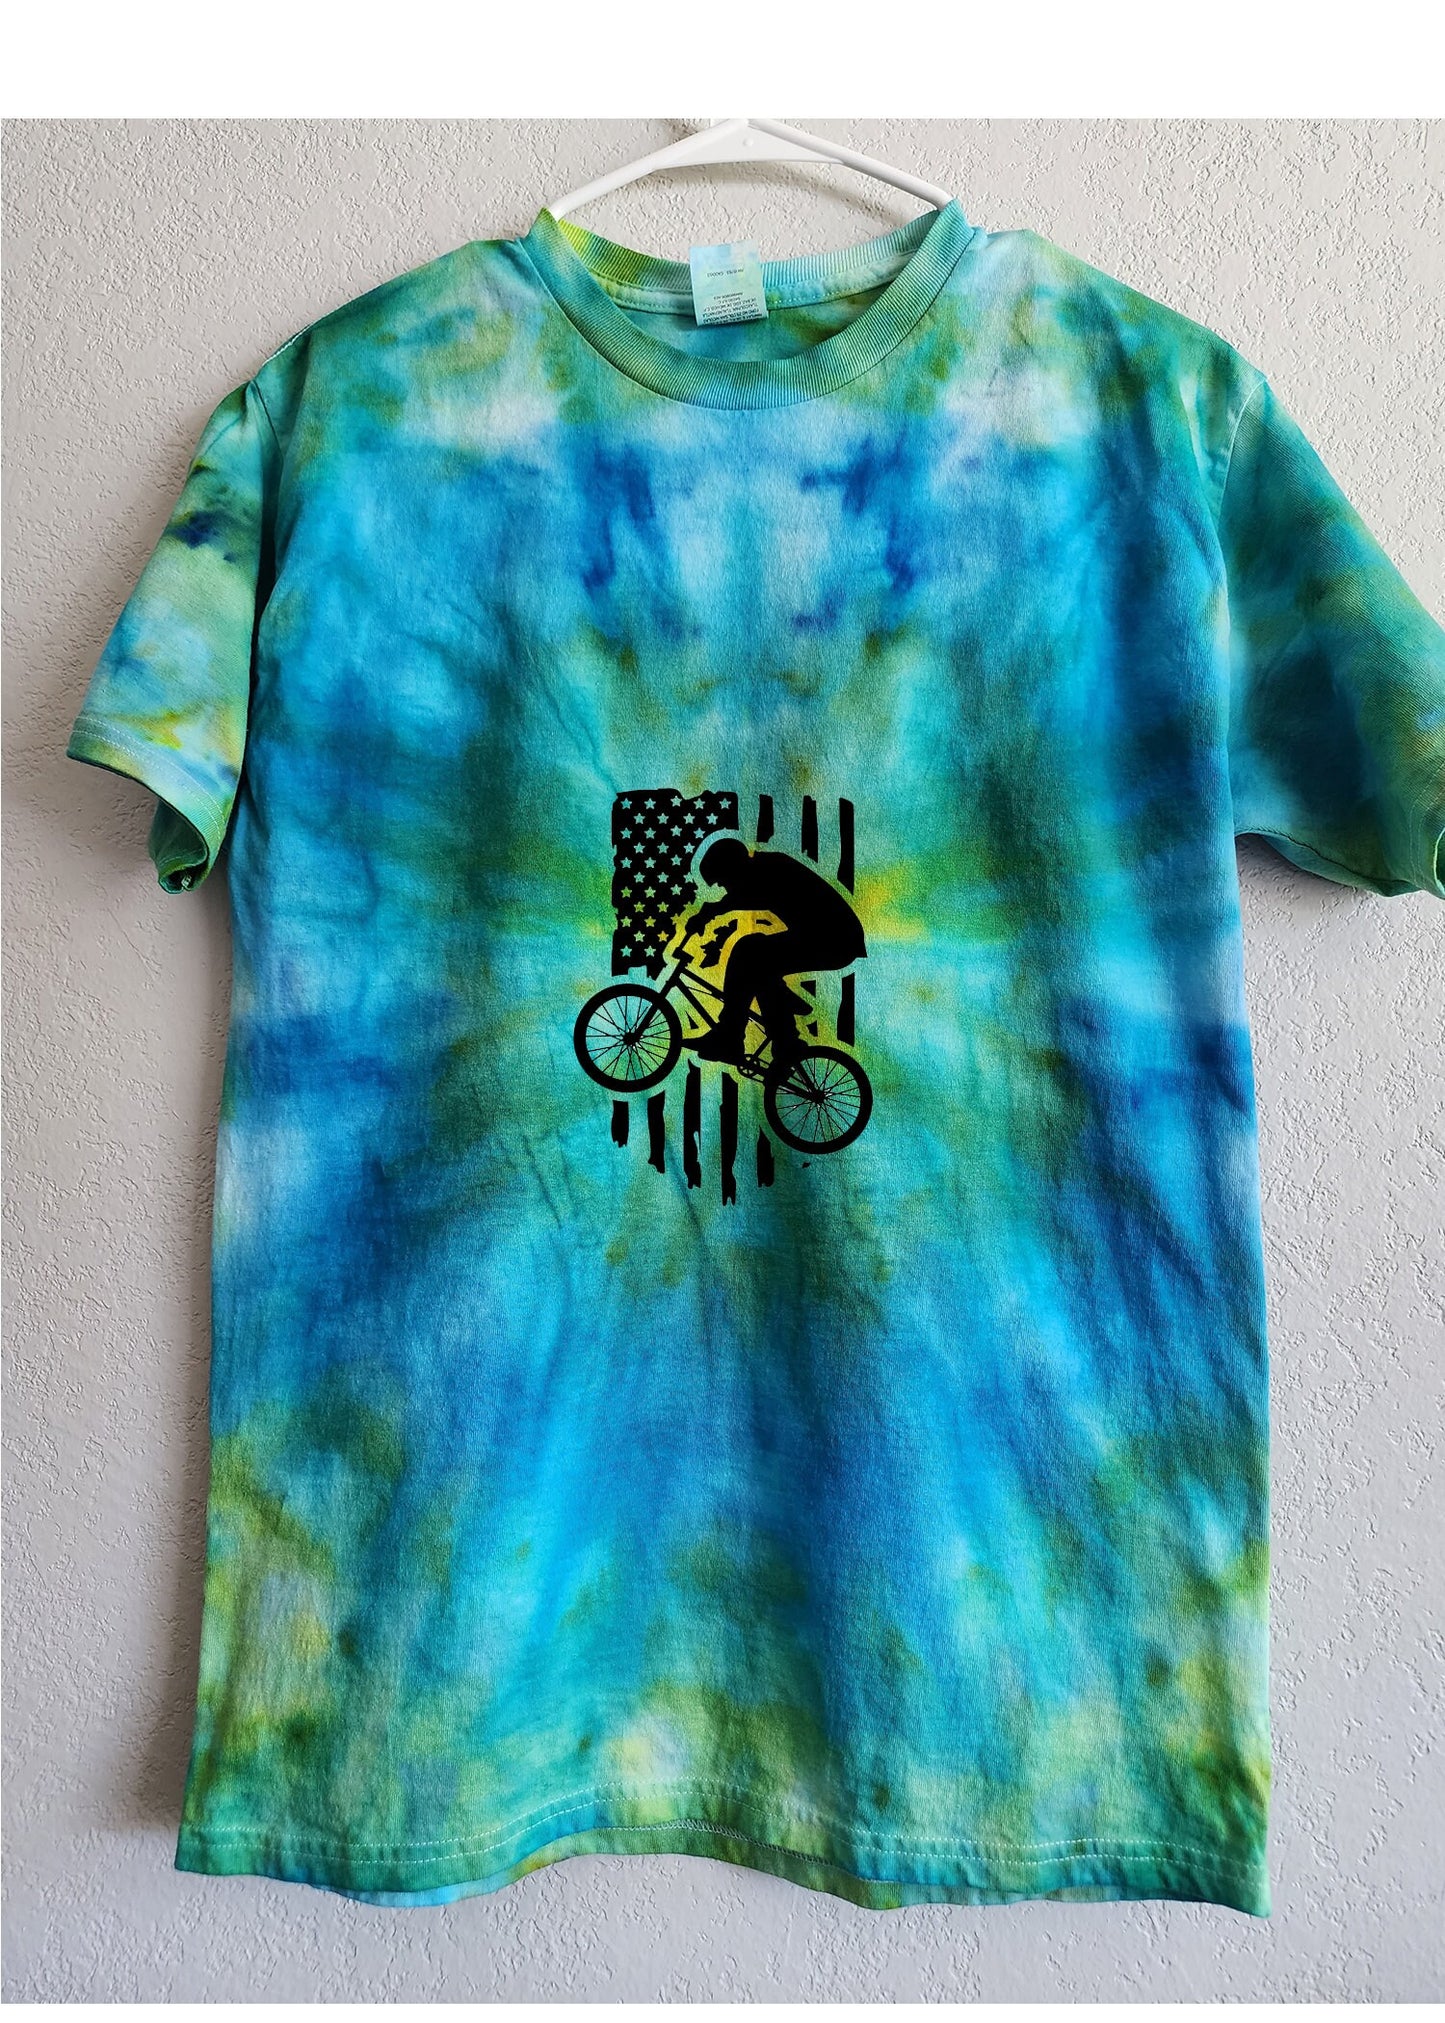 Kid's Blue Green with Star Tie Dye T Shirt Customizable Size Youth XL